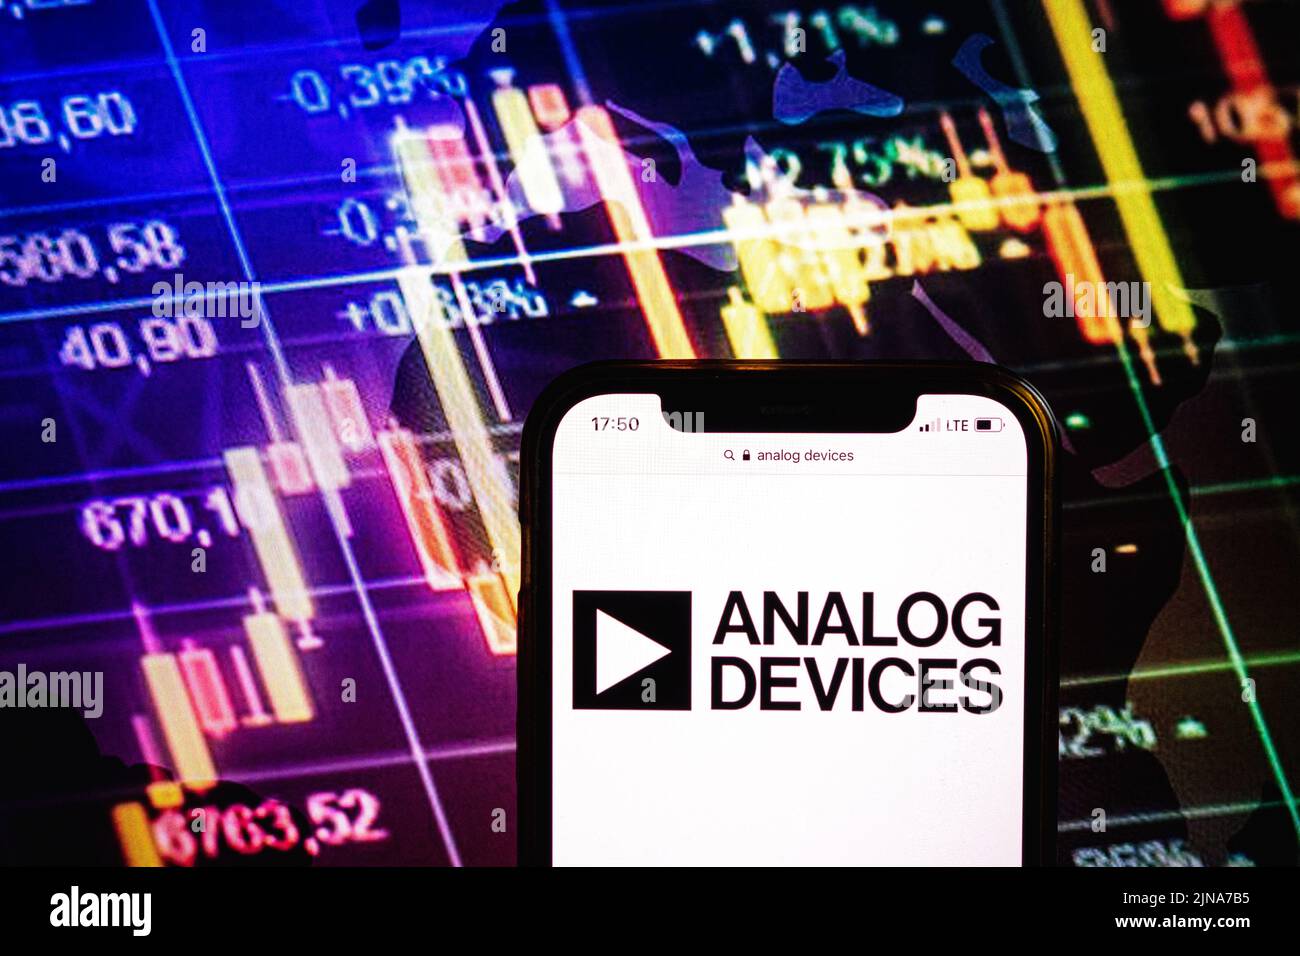 KONSKIE, POLAND - August 09, 2022: Smartphone displaying logo of Analog Devices company on stock exchange diagram background Stock Photo